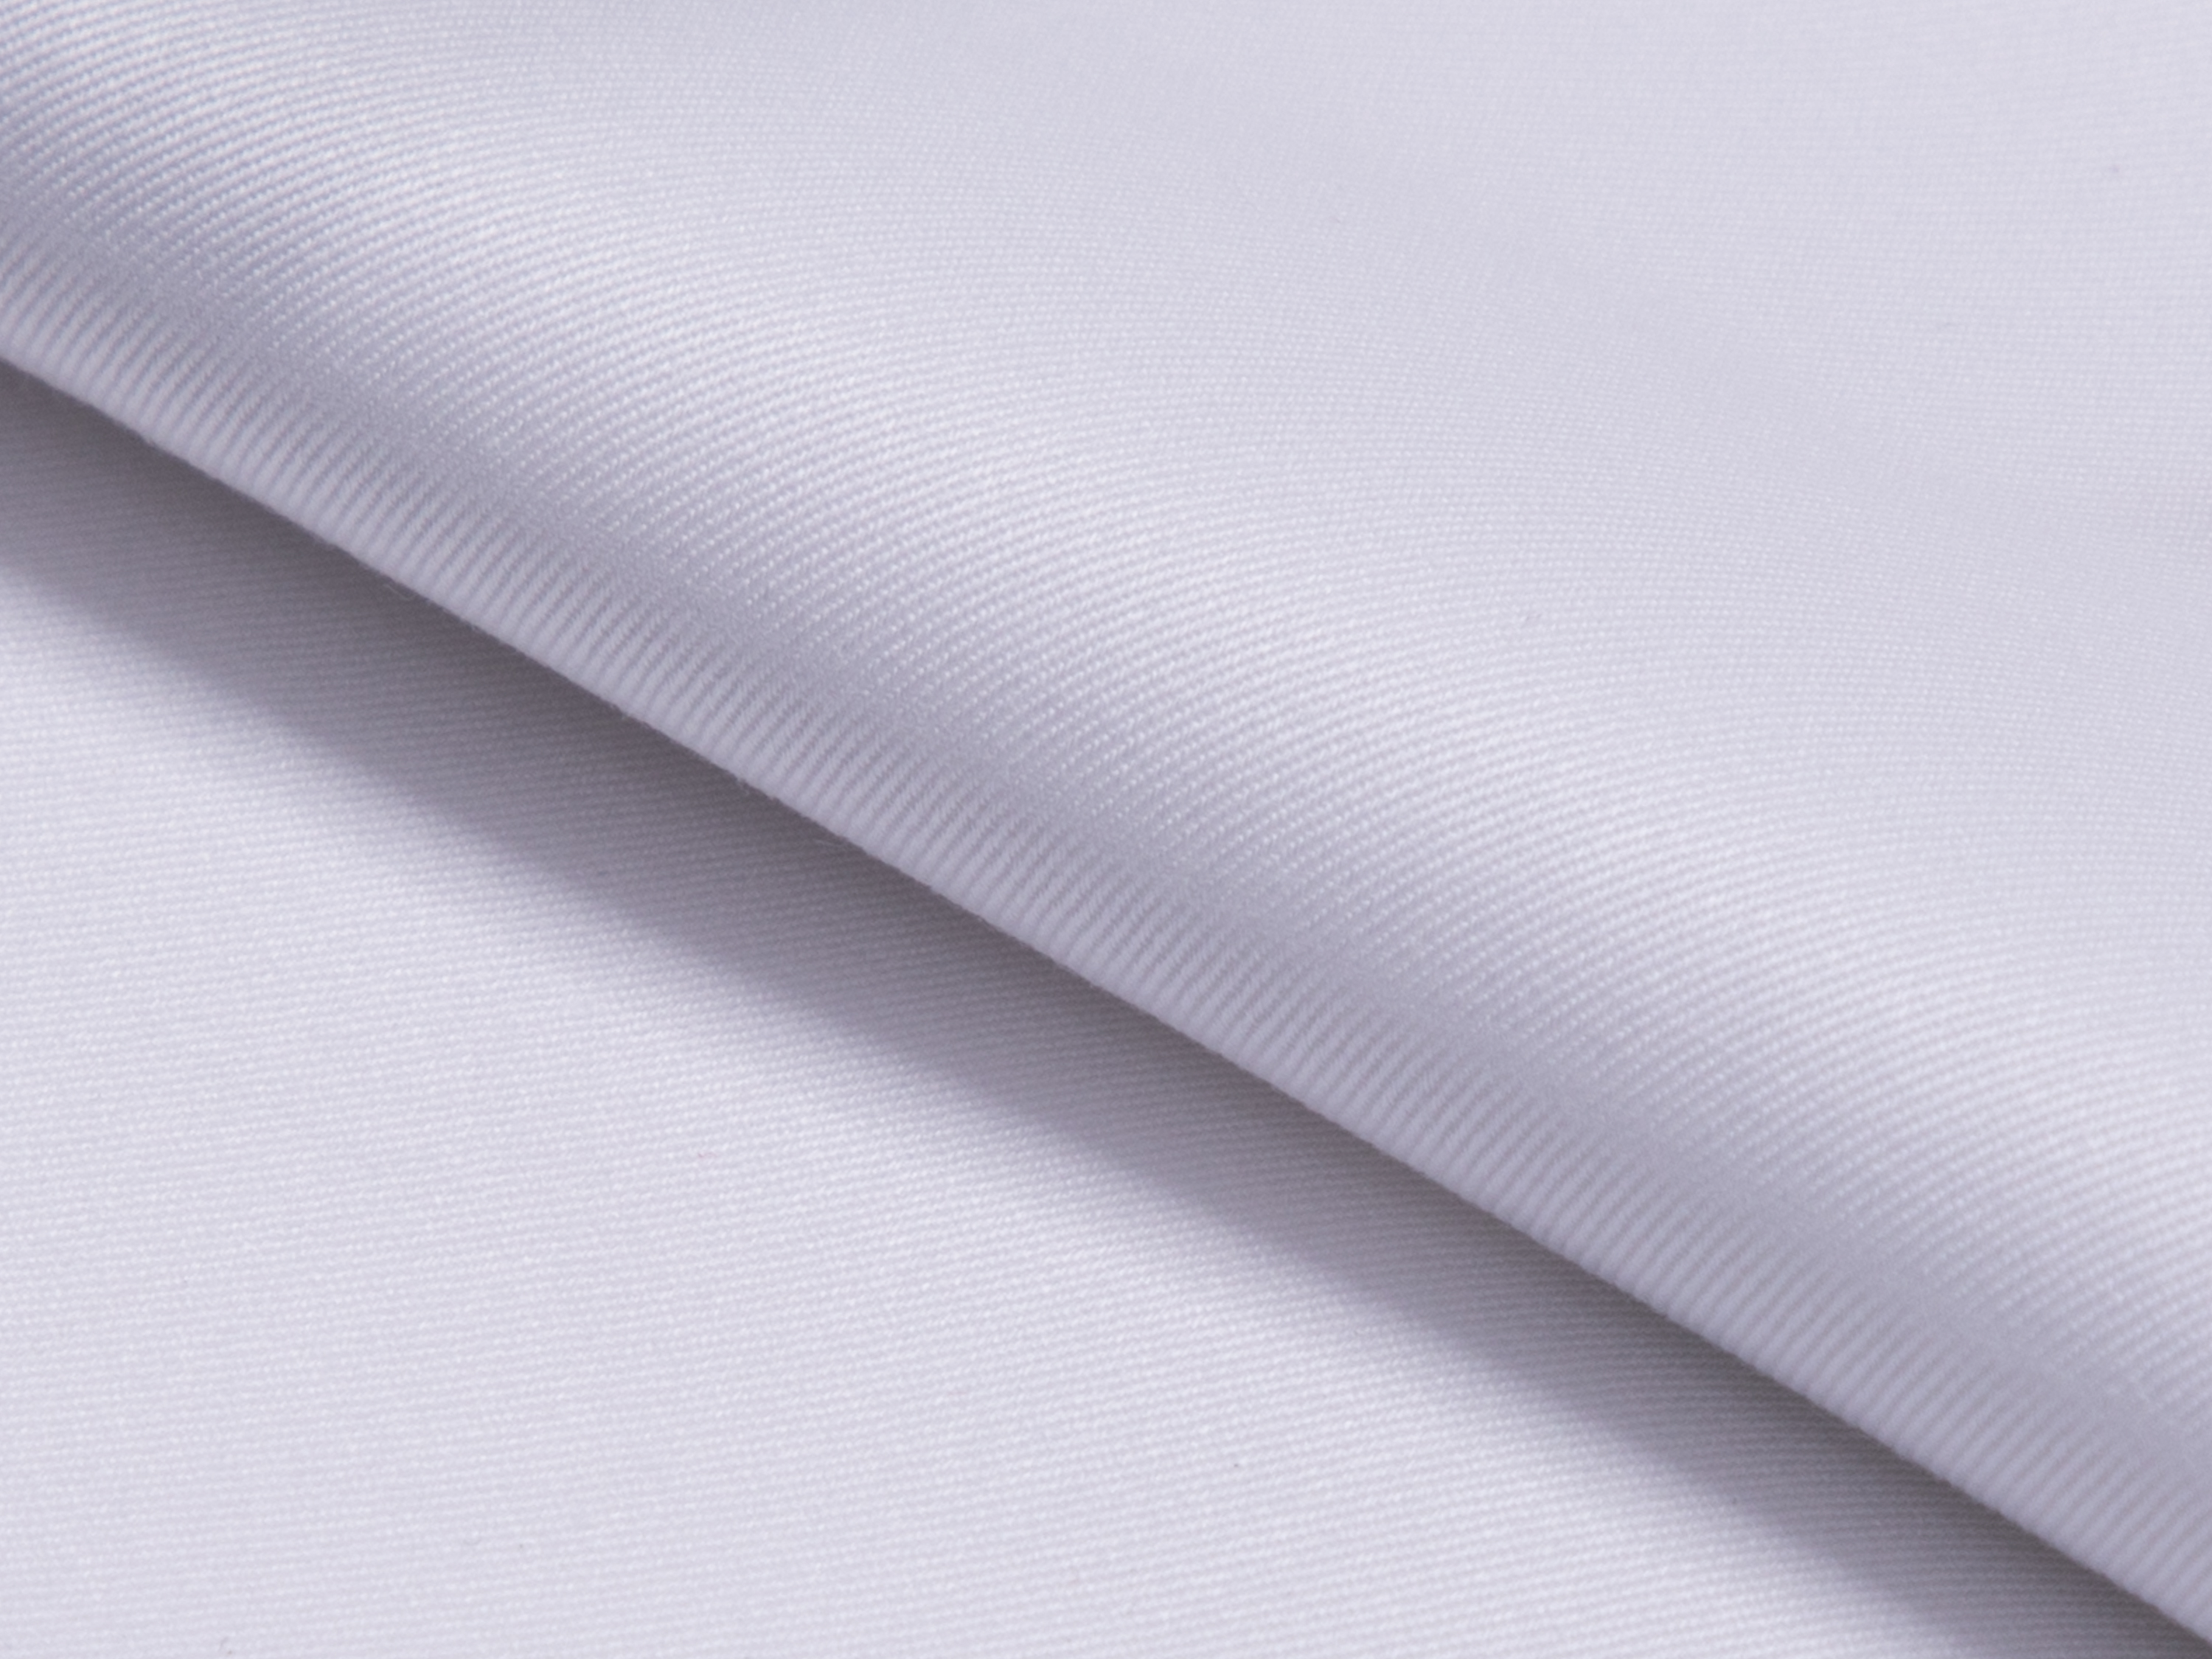 Buy tailor made shirts online -  - Twill White